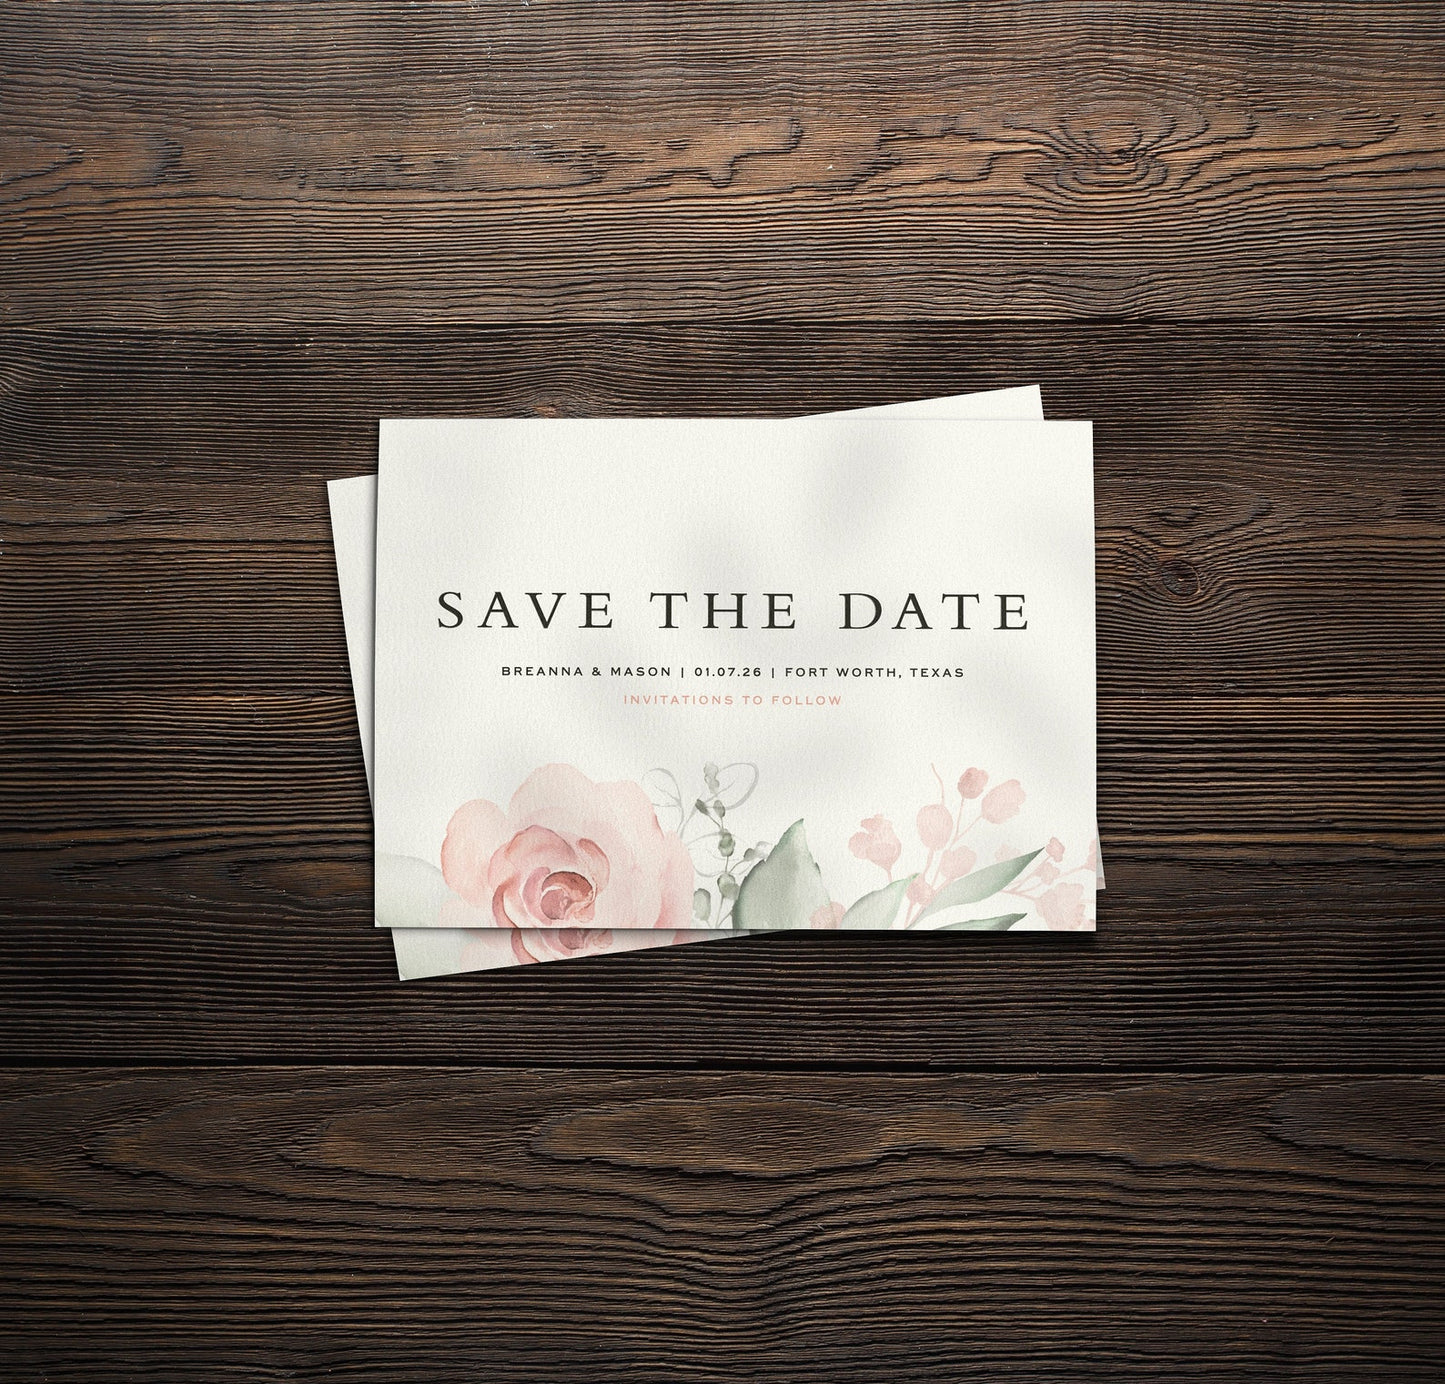 Whimsical Save The Date Cards